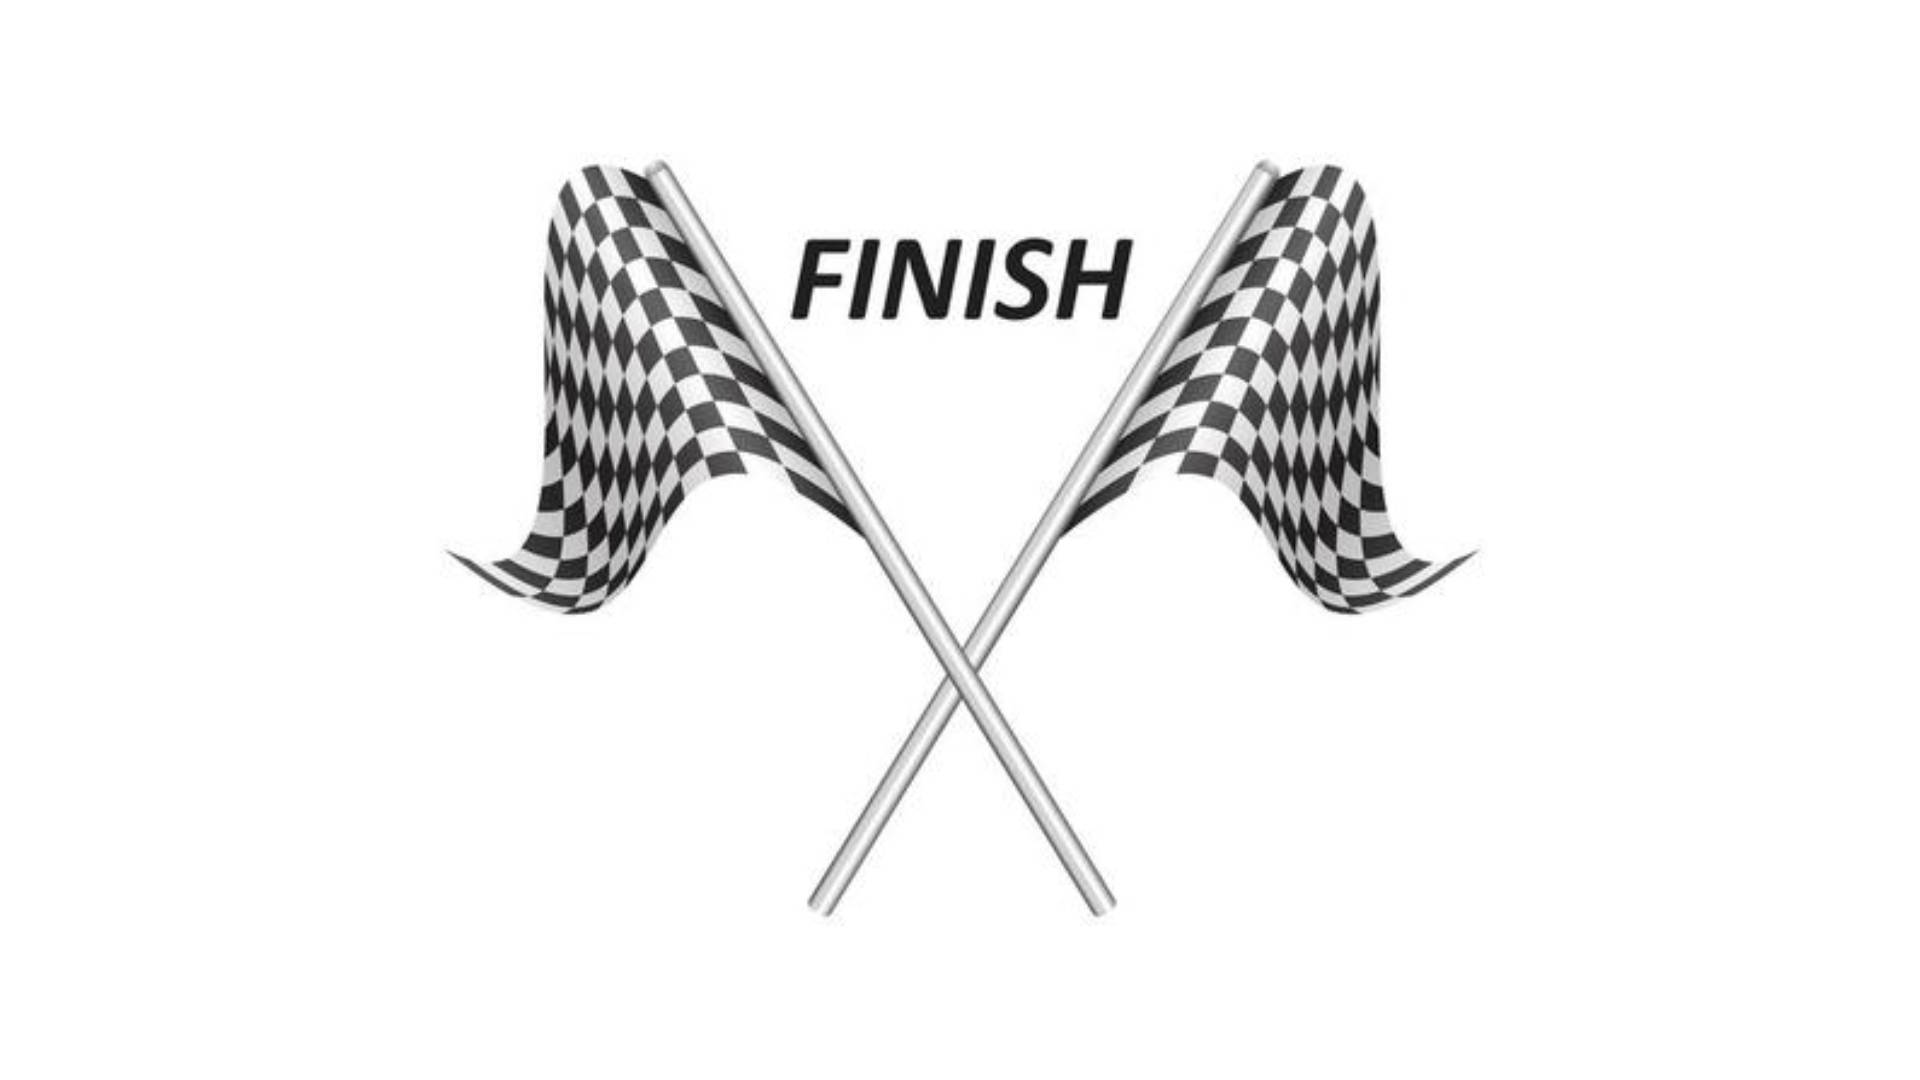 Finish Crossed Checkered Flags